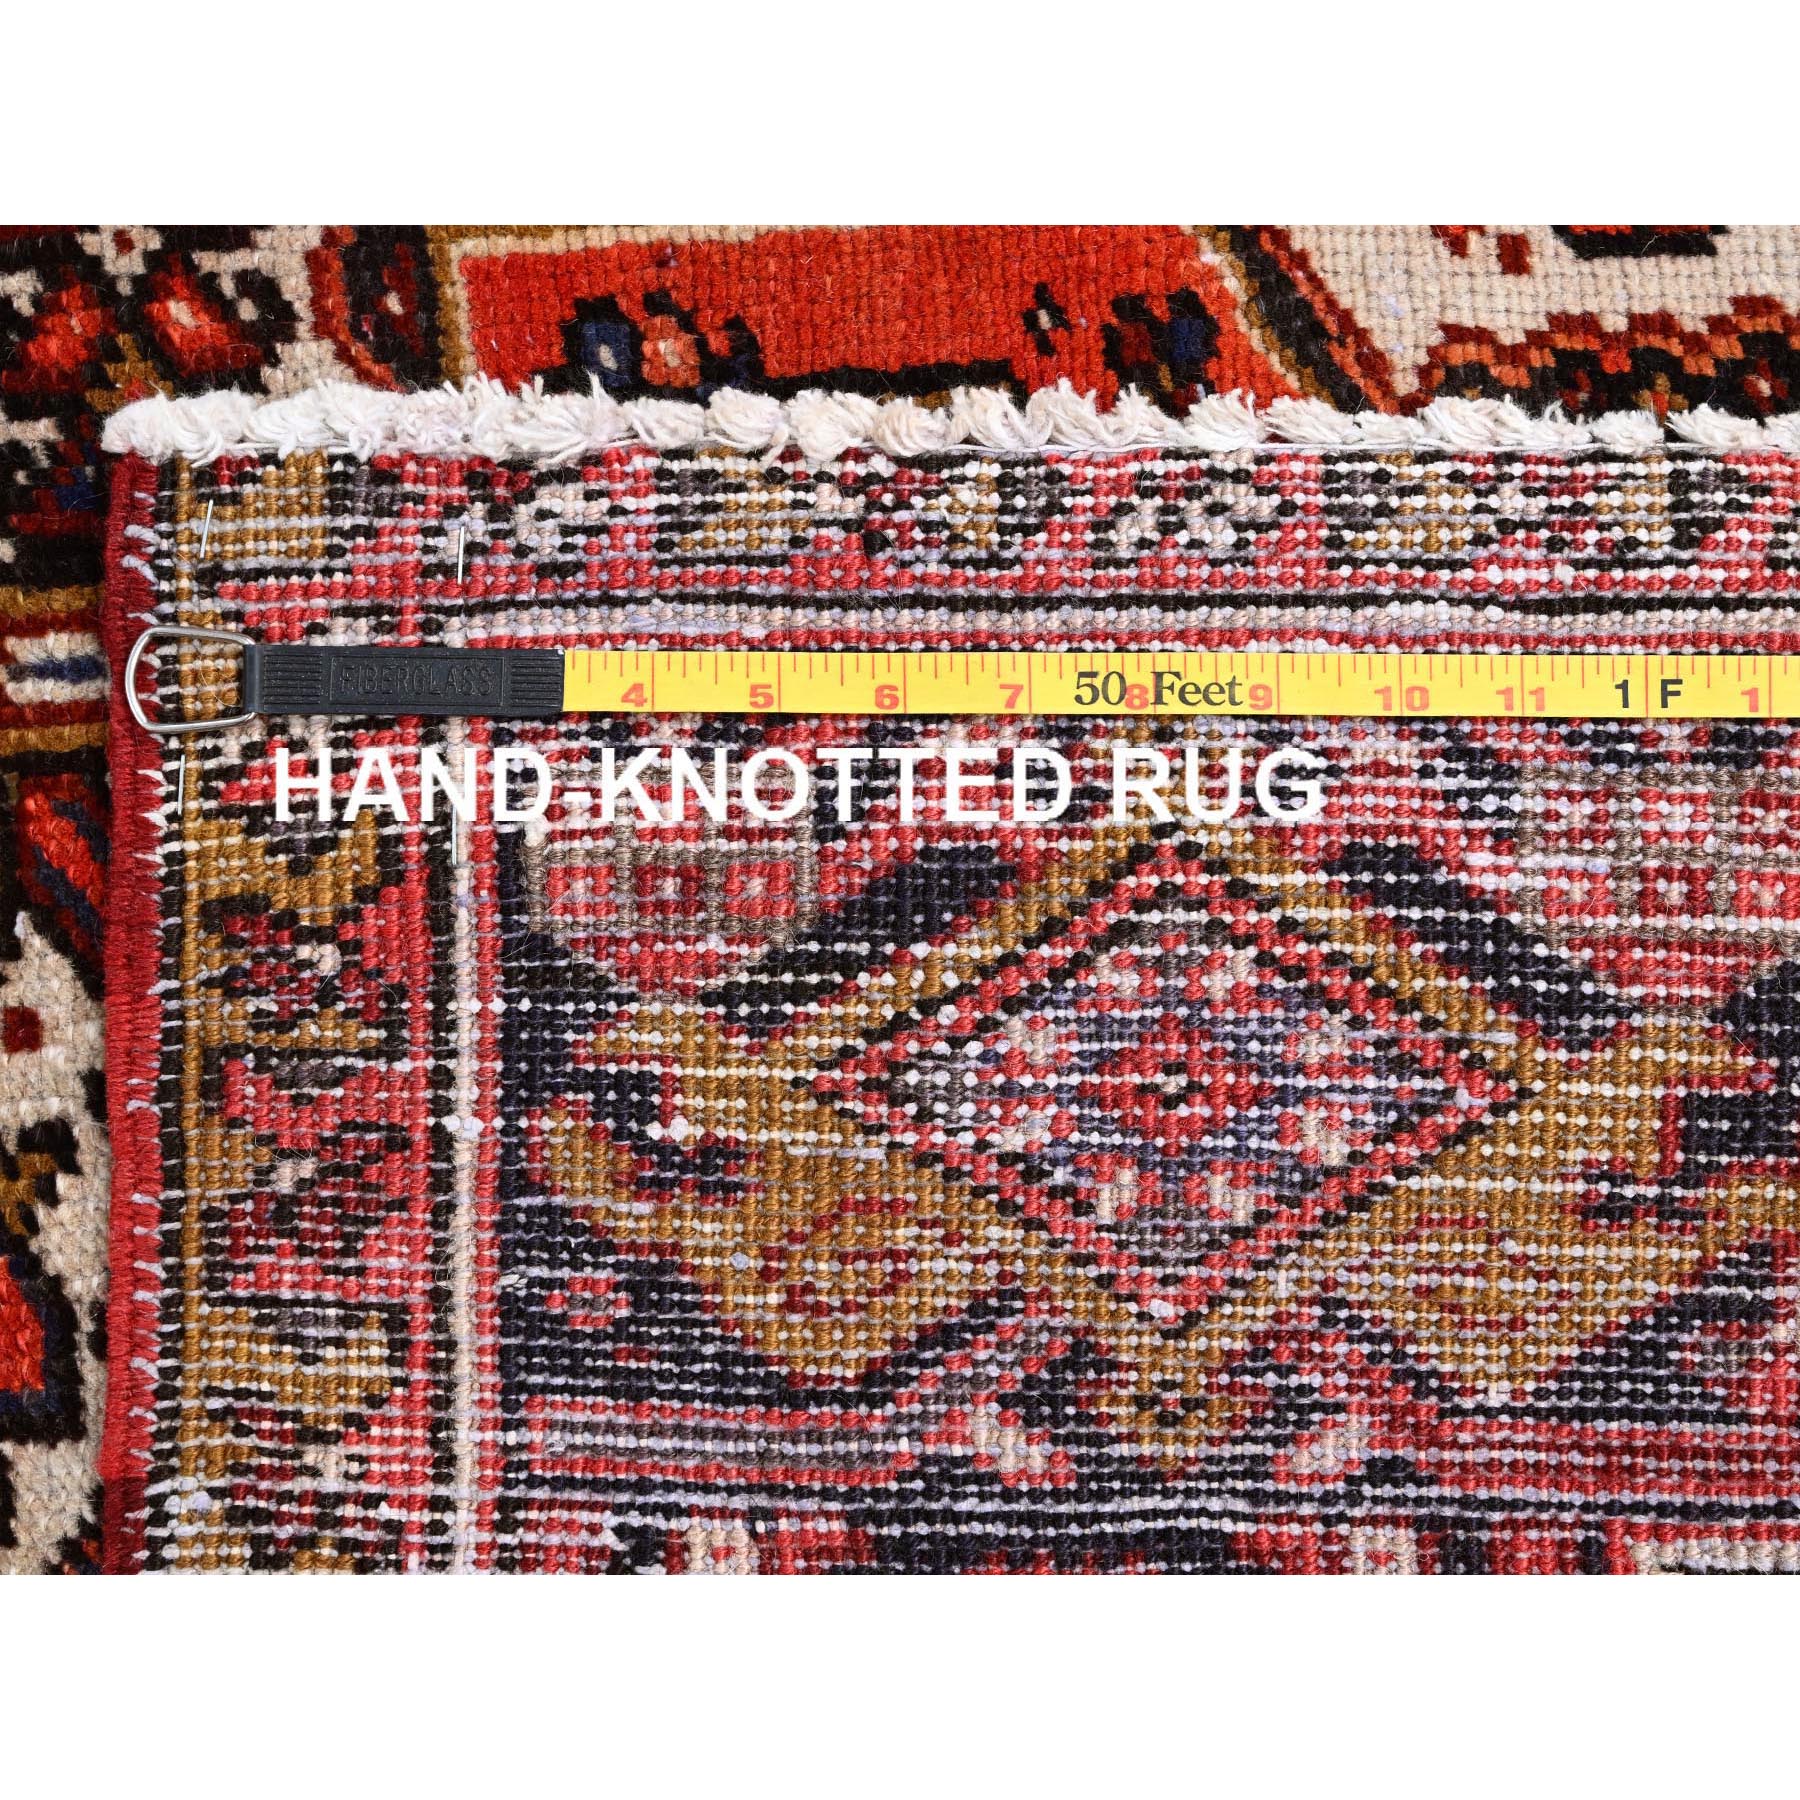 10'x13'2" Fire Brick Red, Pure Wool, Hand Woven, Semi Antique Persian Heriz with Village Motif, Good Condition, Distressed Look, Oriental Rug 